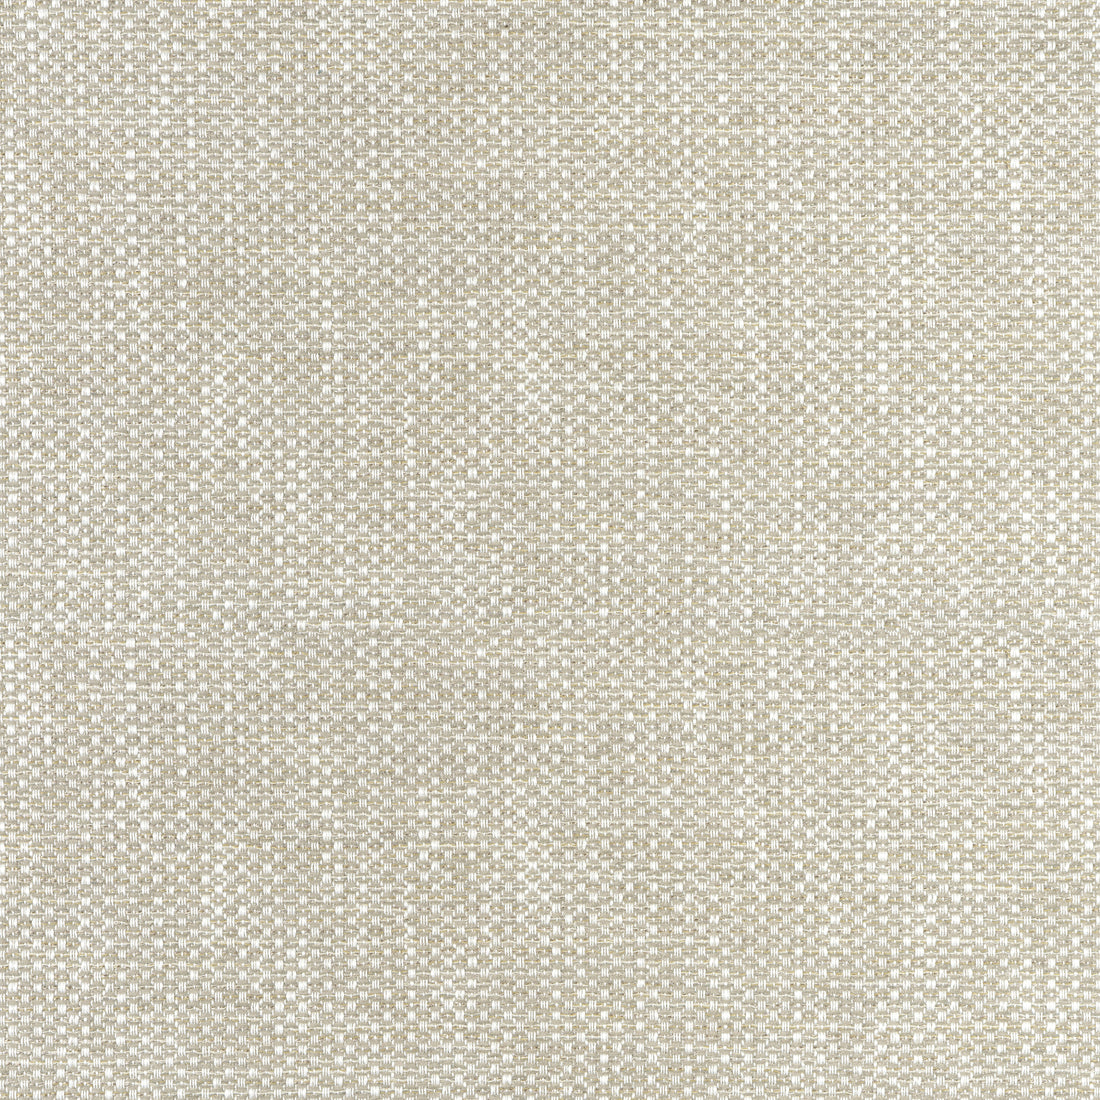 Cascade fabric in dove color - pattern number W75255 - by Thibaut in the Elements collection